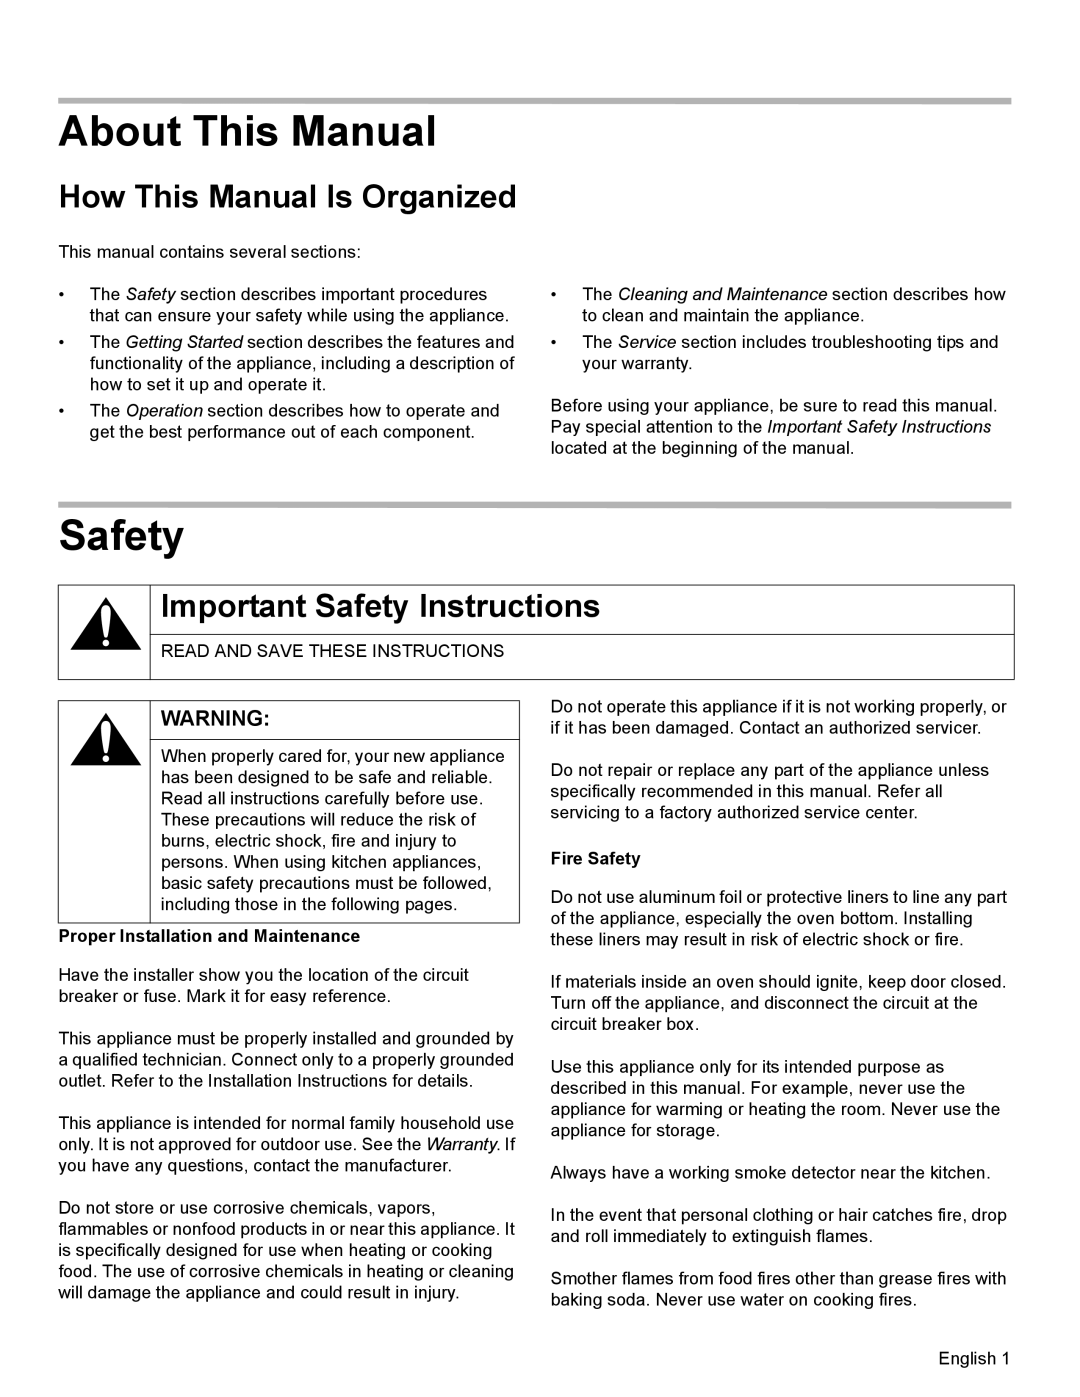 Thermador WD27, WD30 manual About This Manual, How This Manual Is Organized, Important Safety Instructions, Fire Safety 